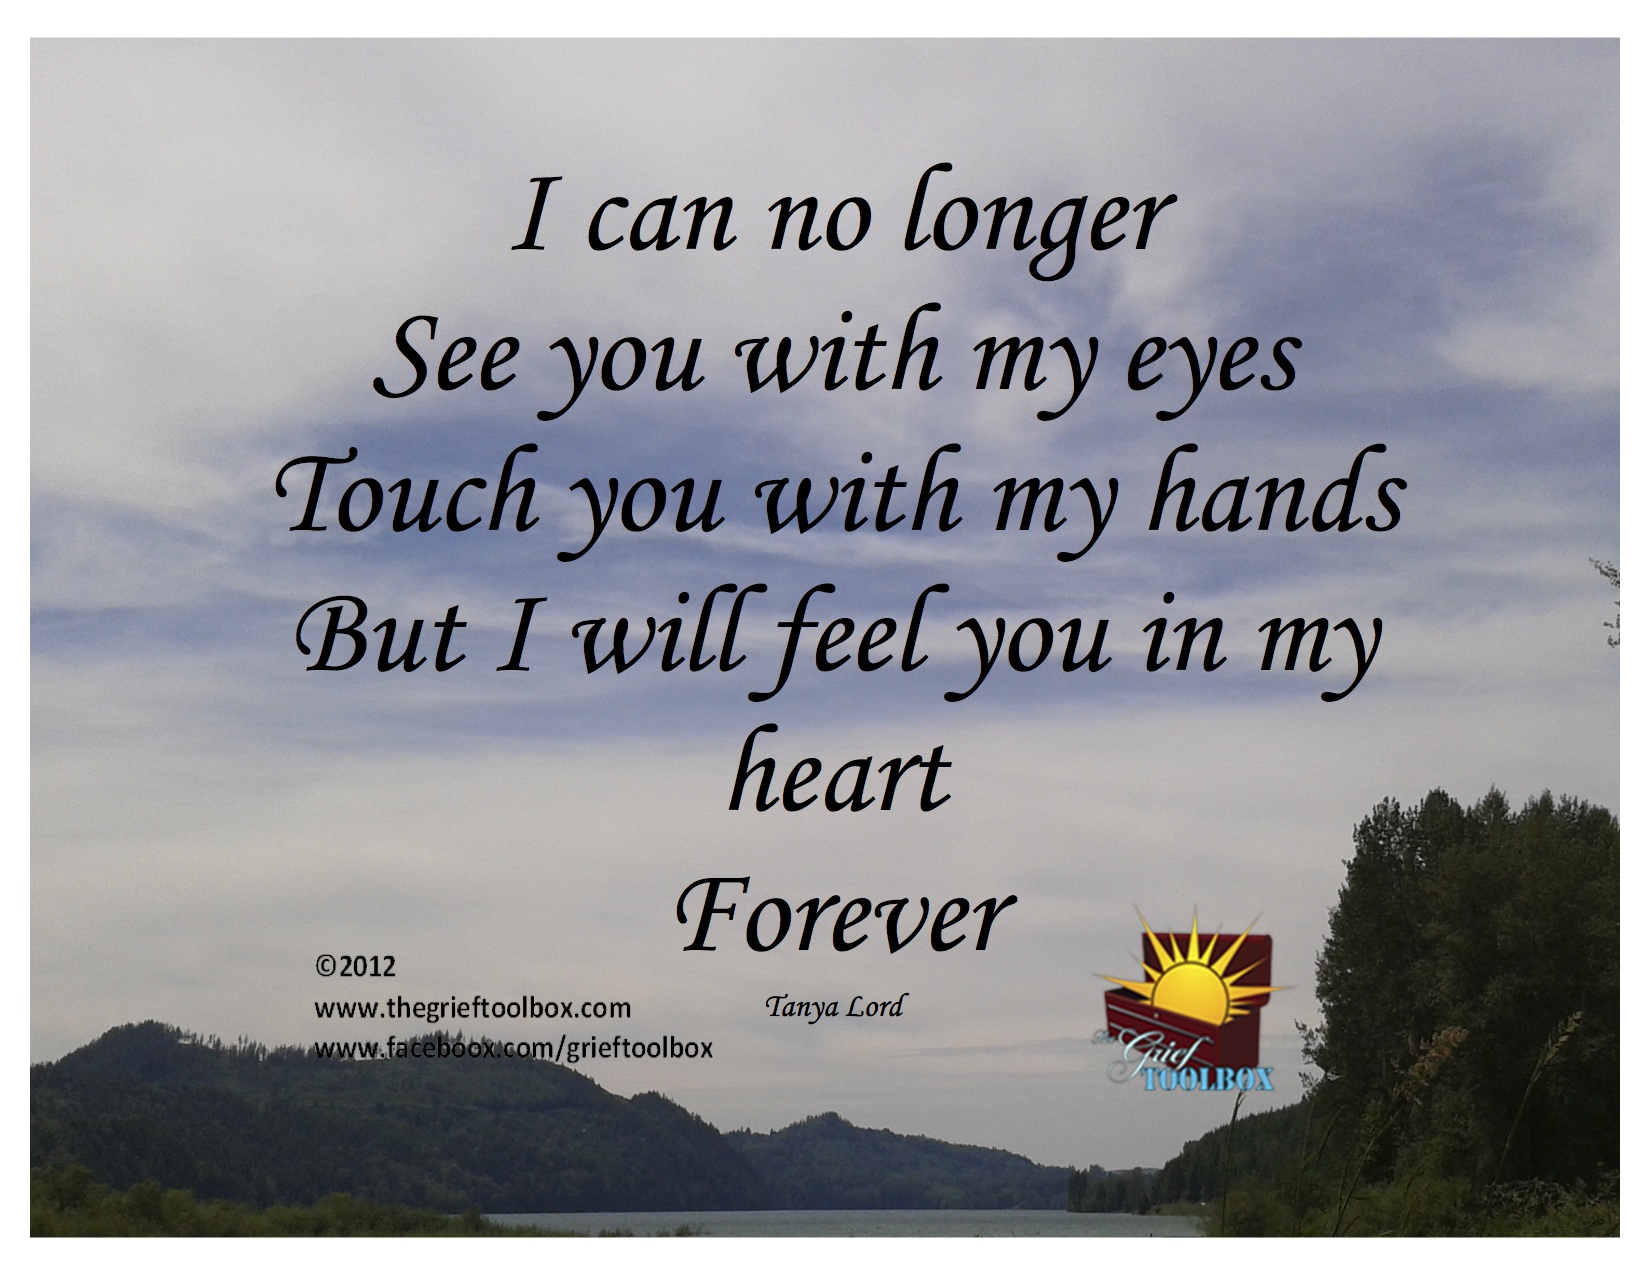 Feel you in my heart forever - A Poem | The Grief Toolbox